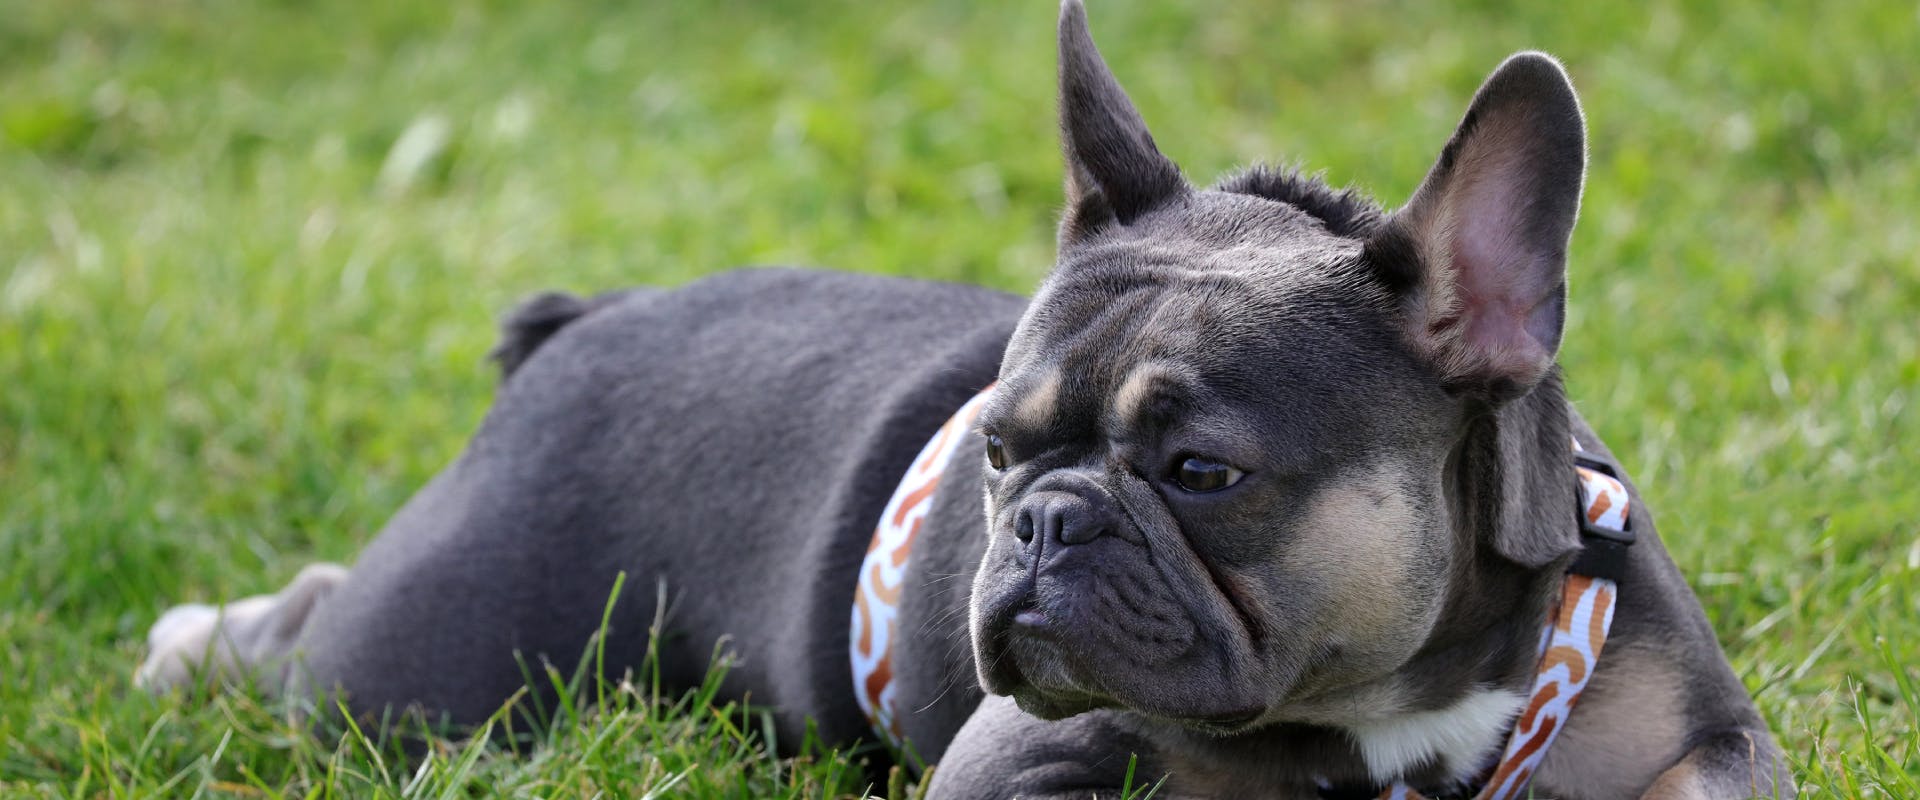 french bulldog lying down in the grass with a harness on